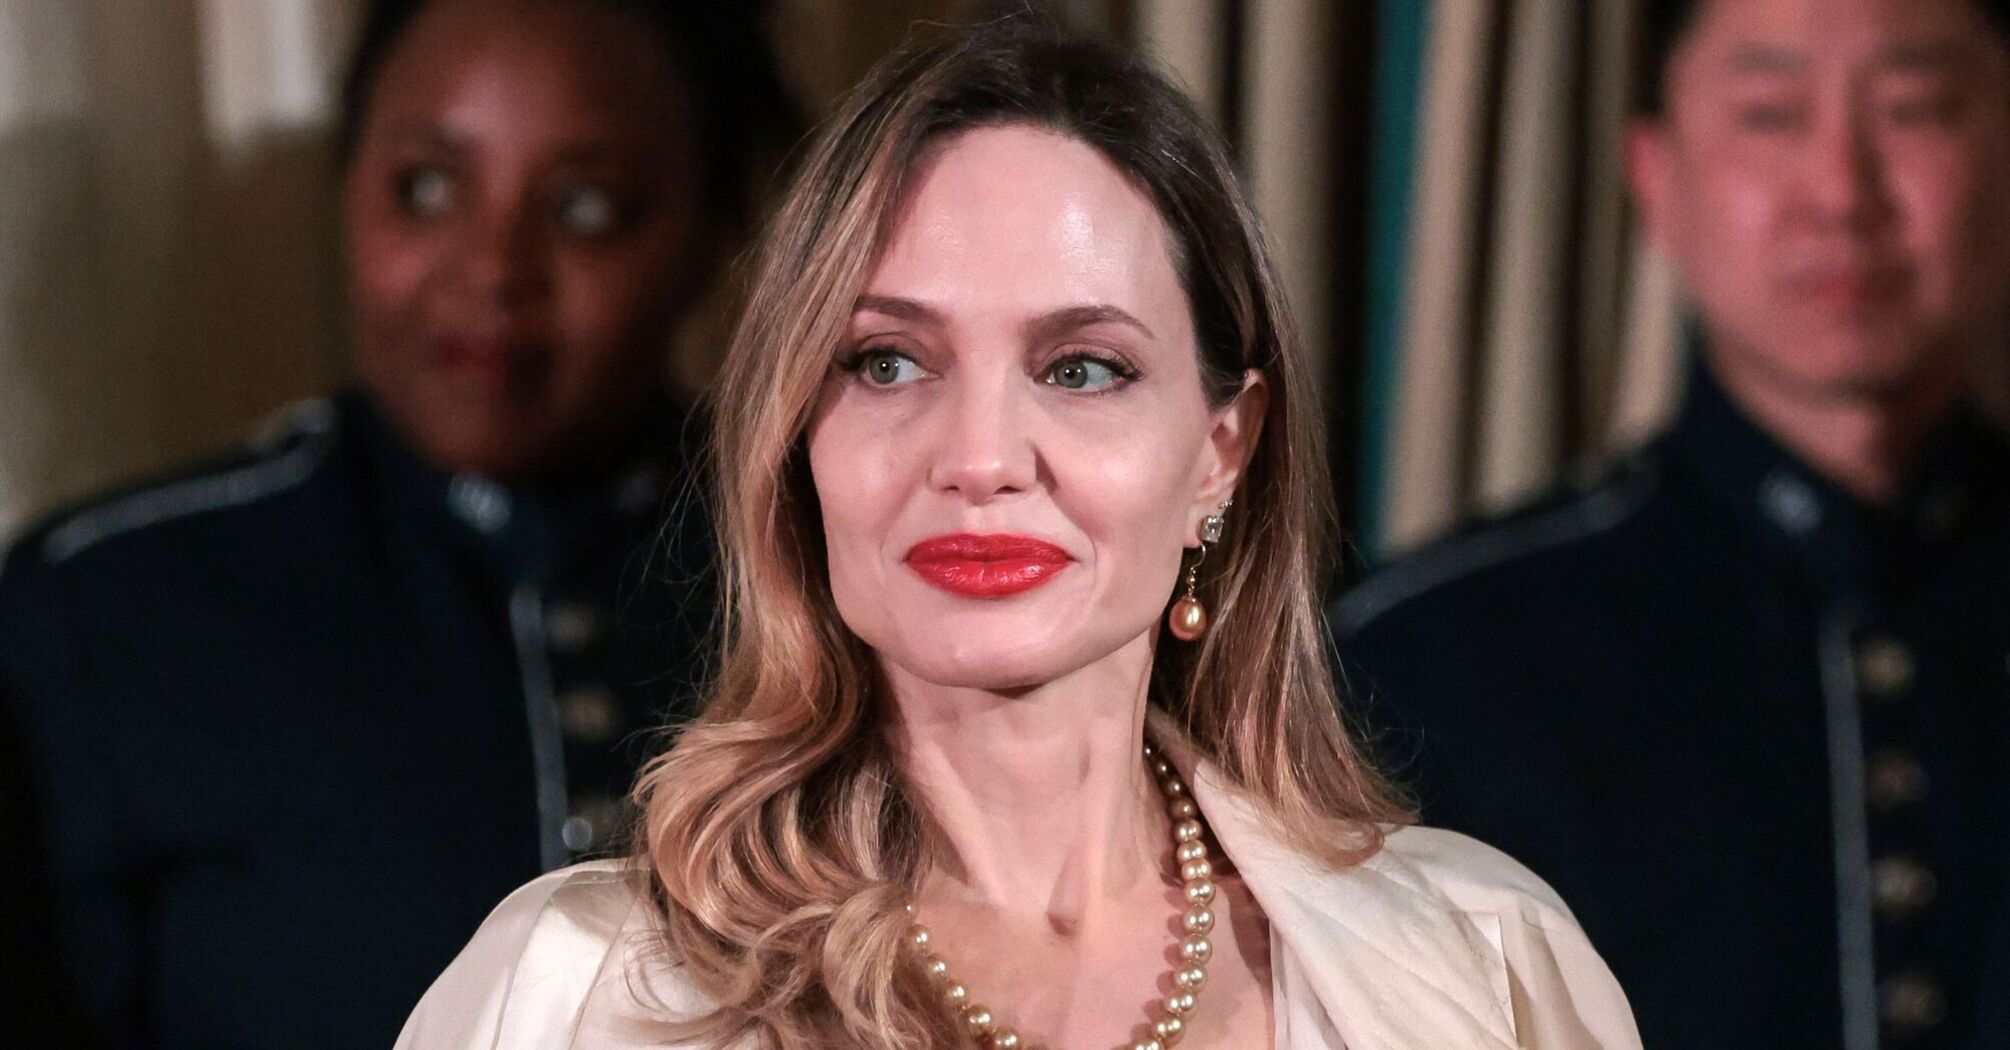 Five facts about Angelina Jolie